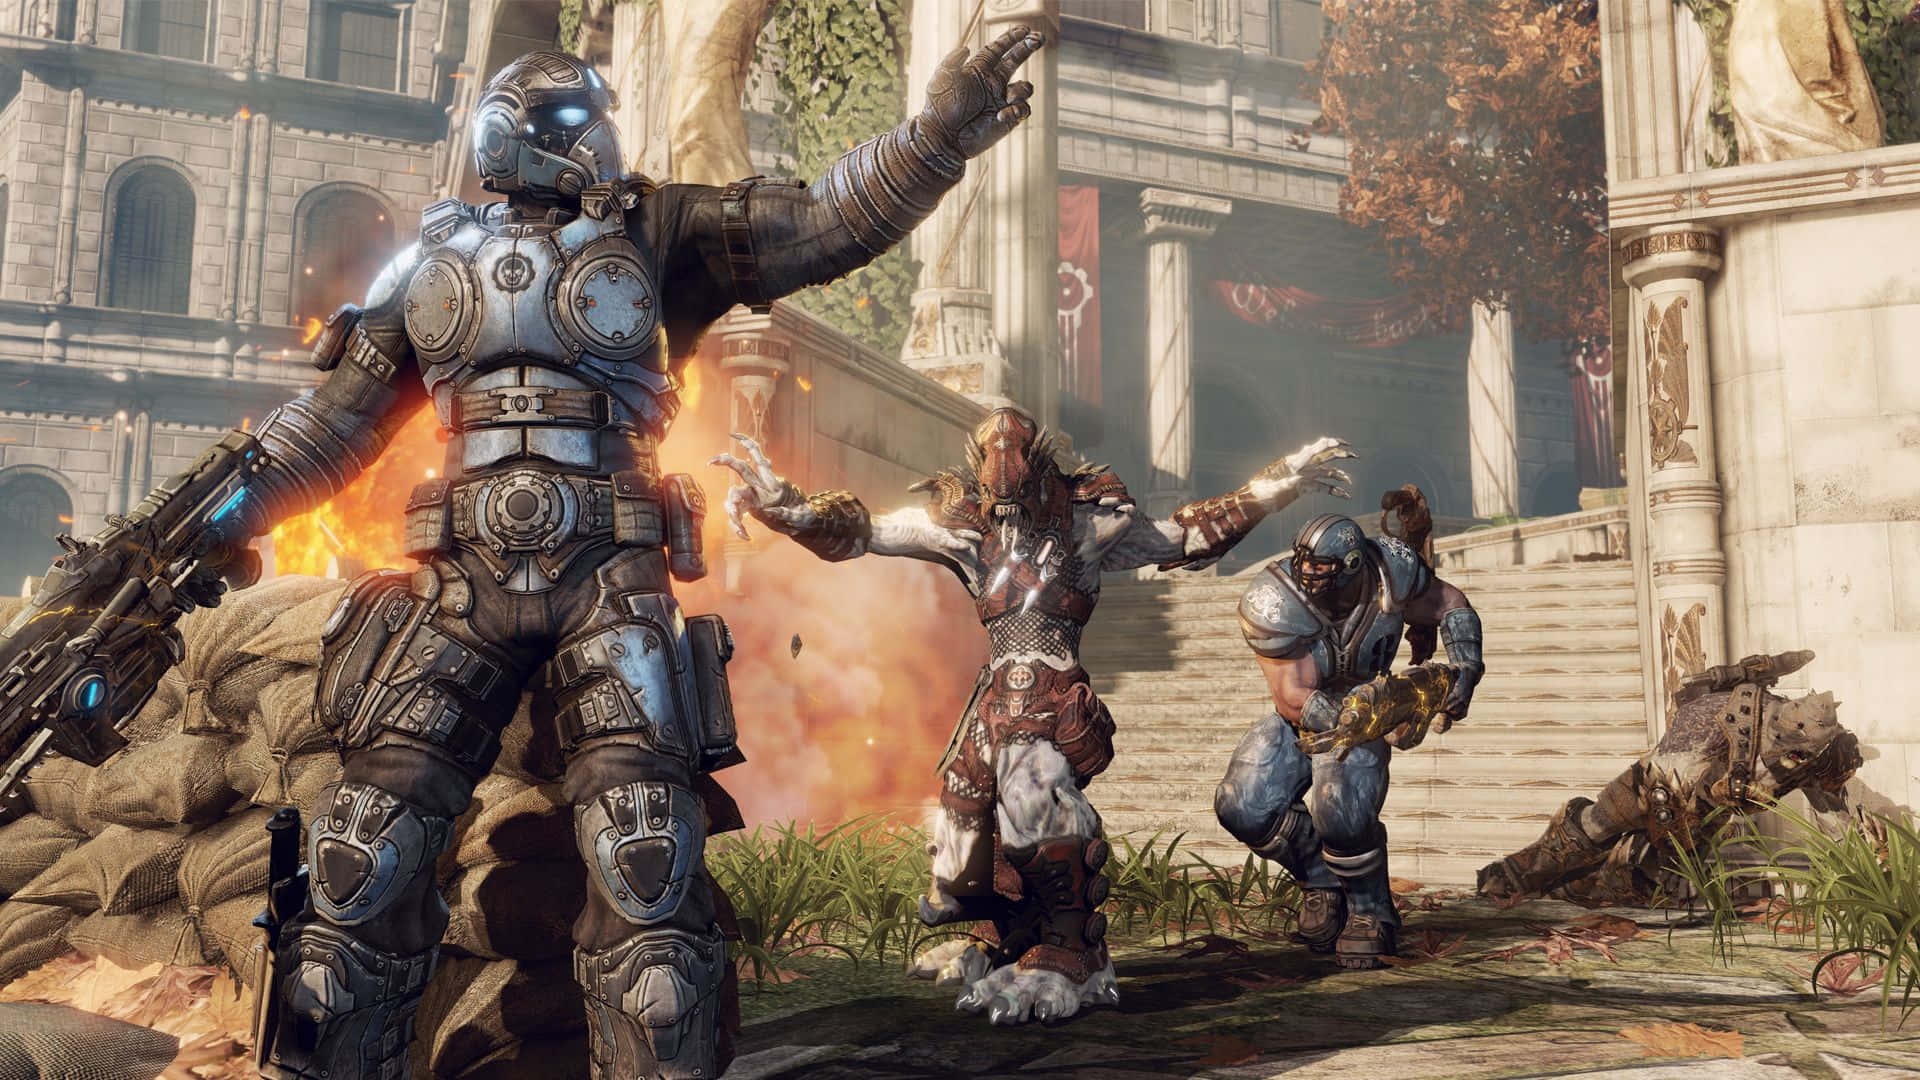 Get the show-stopping gaming experience with the Best Gears of War 5